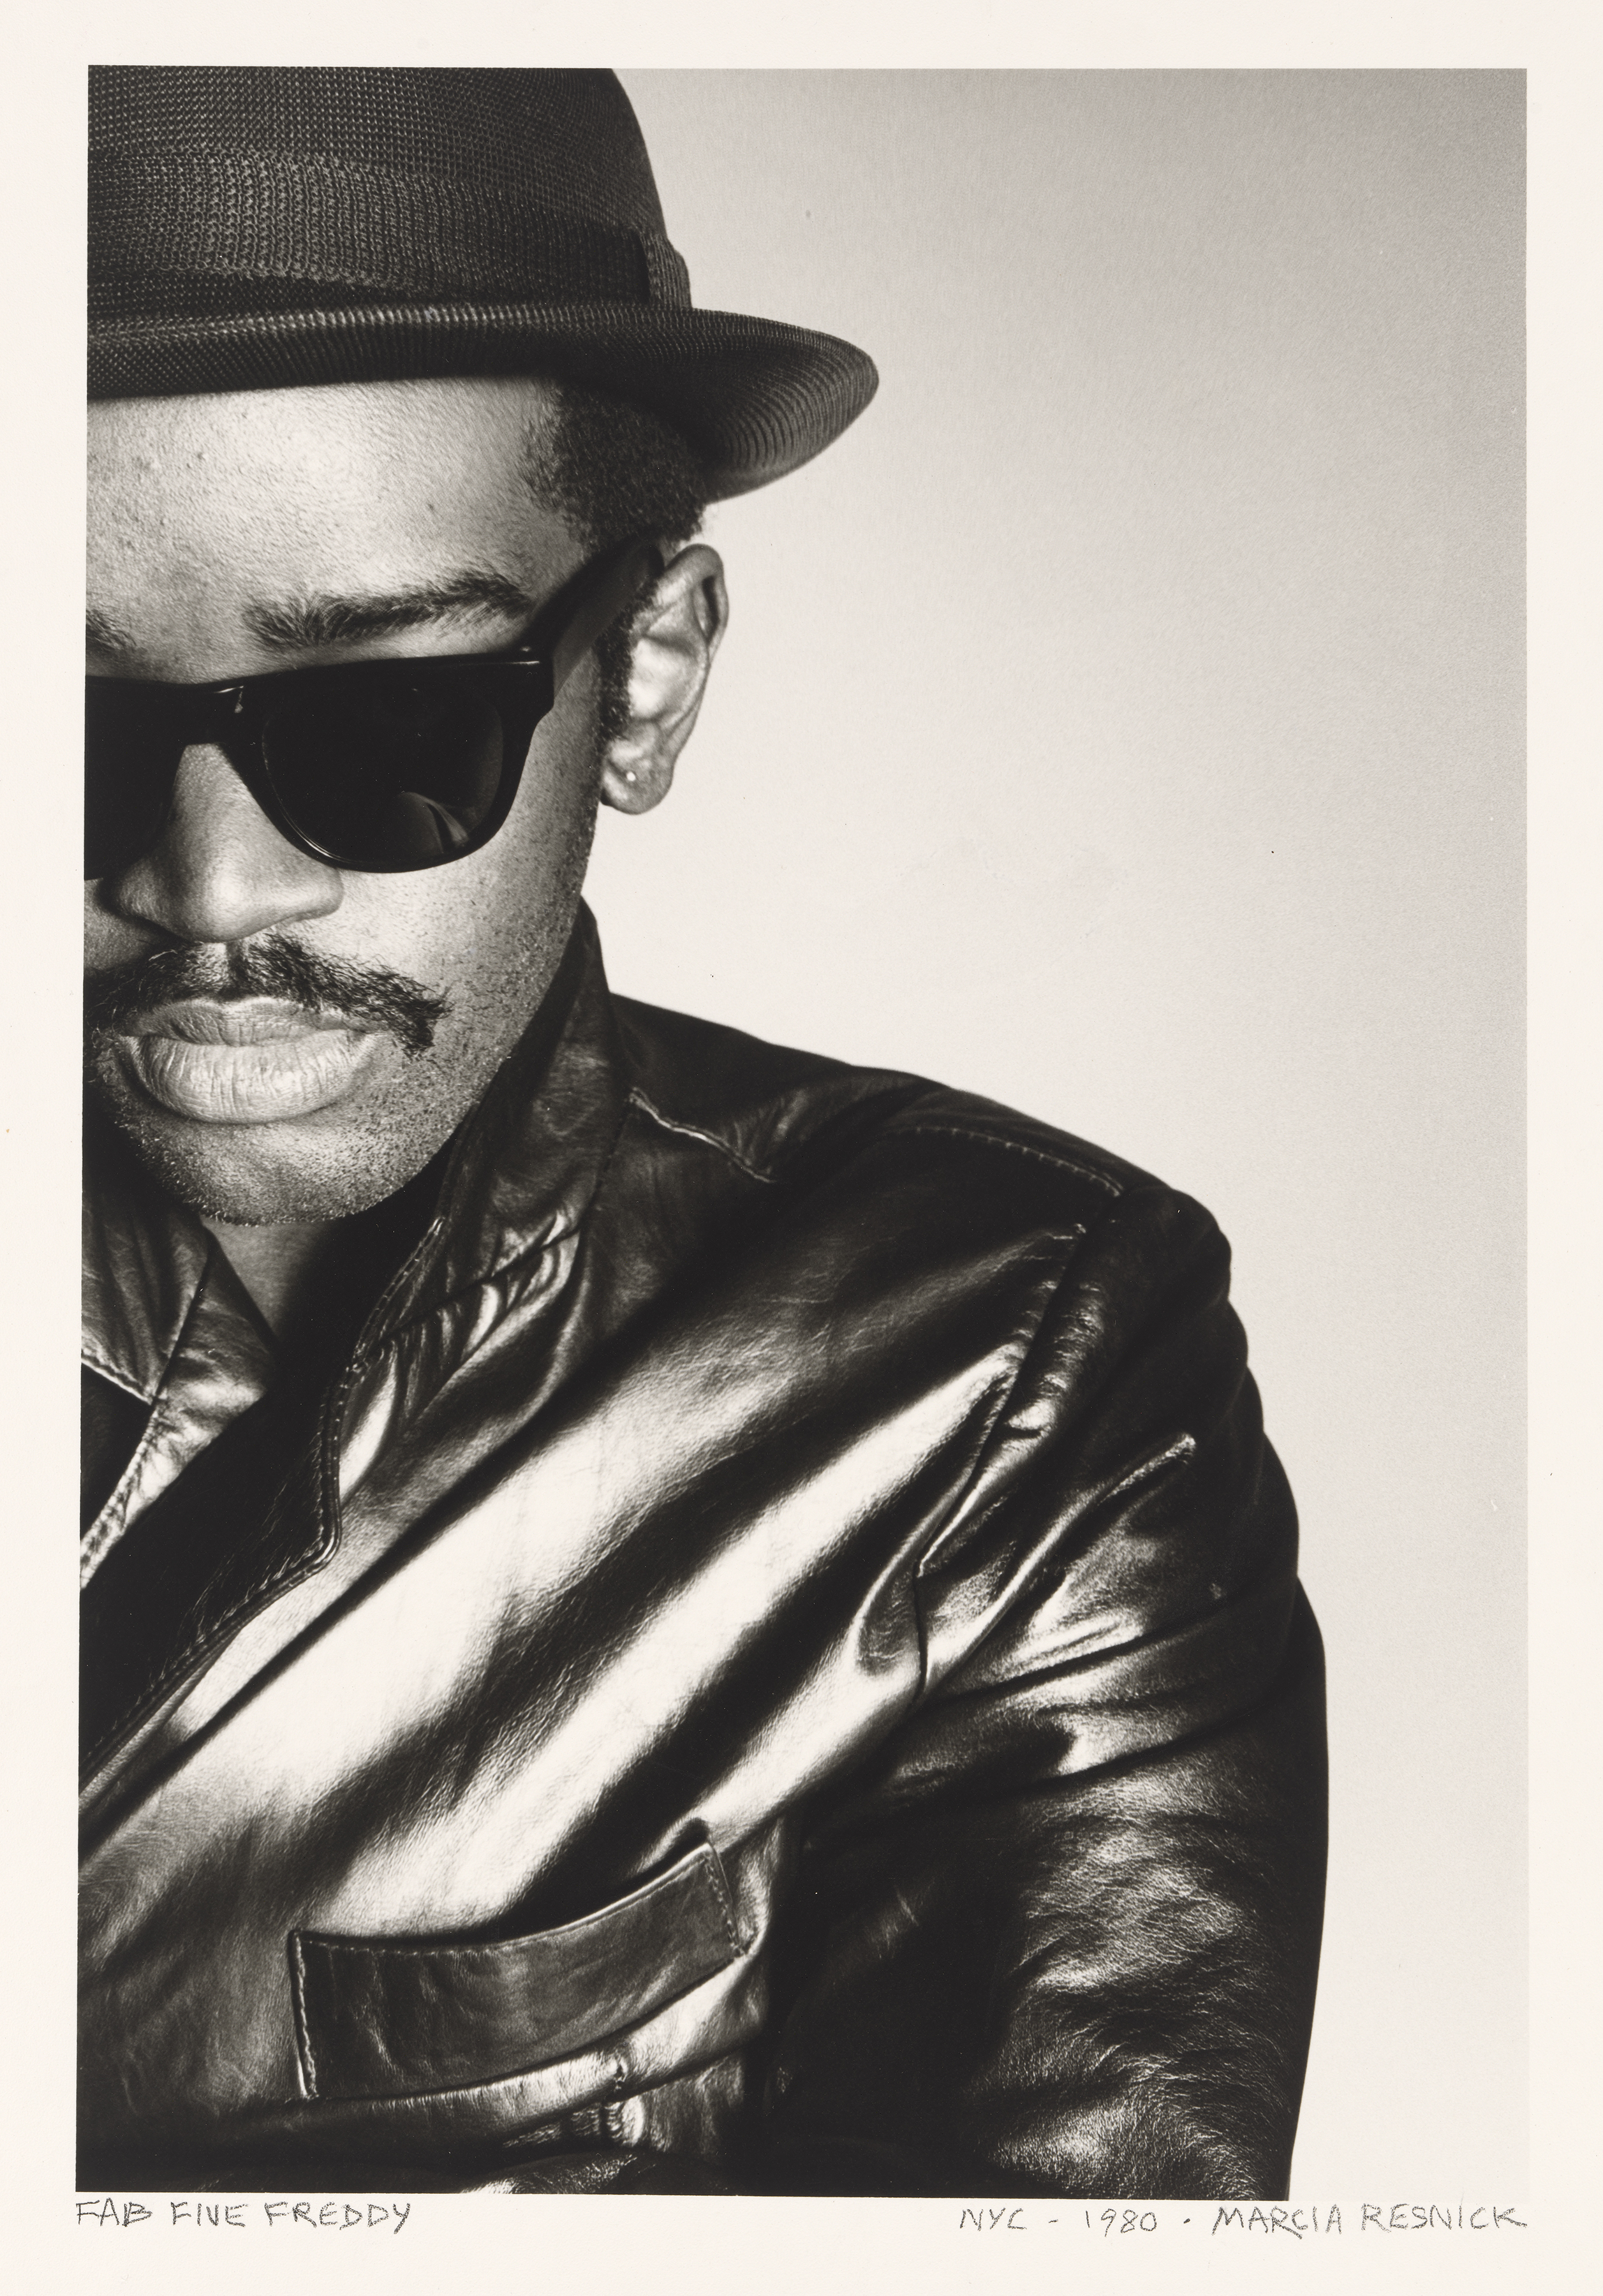 Portrait of Fab 5 Freddy wearing a leather jacket, bowler hat and sunglasses photographed by Marcia Resnick.